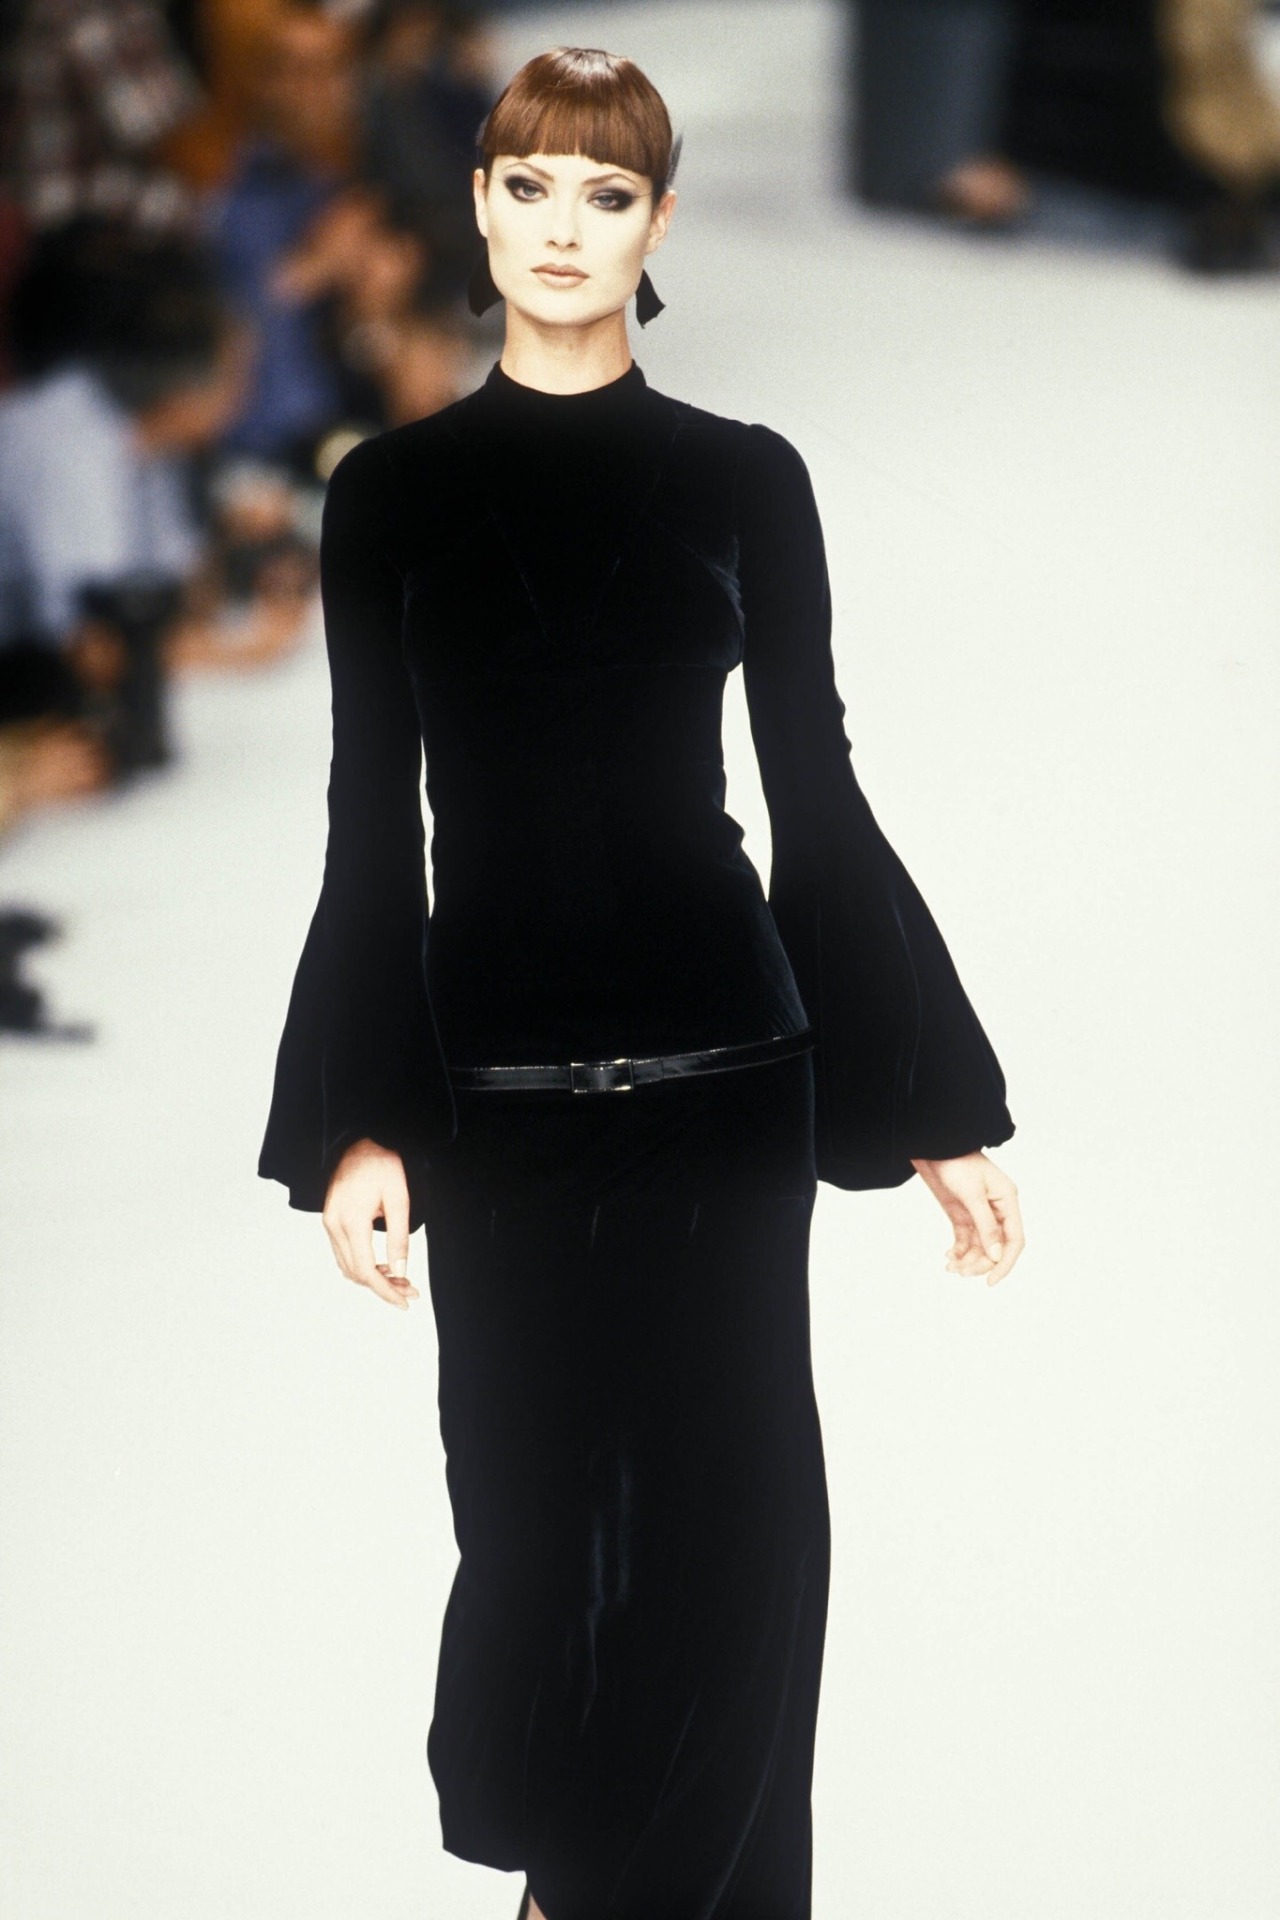 Chanel Haute Couture F/W 1995 - Drunk at Vogue